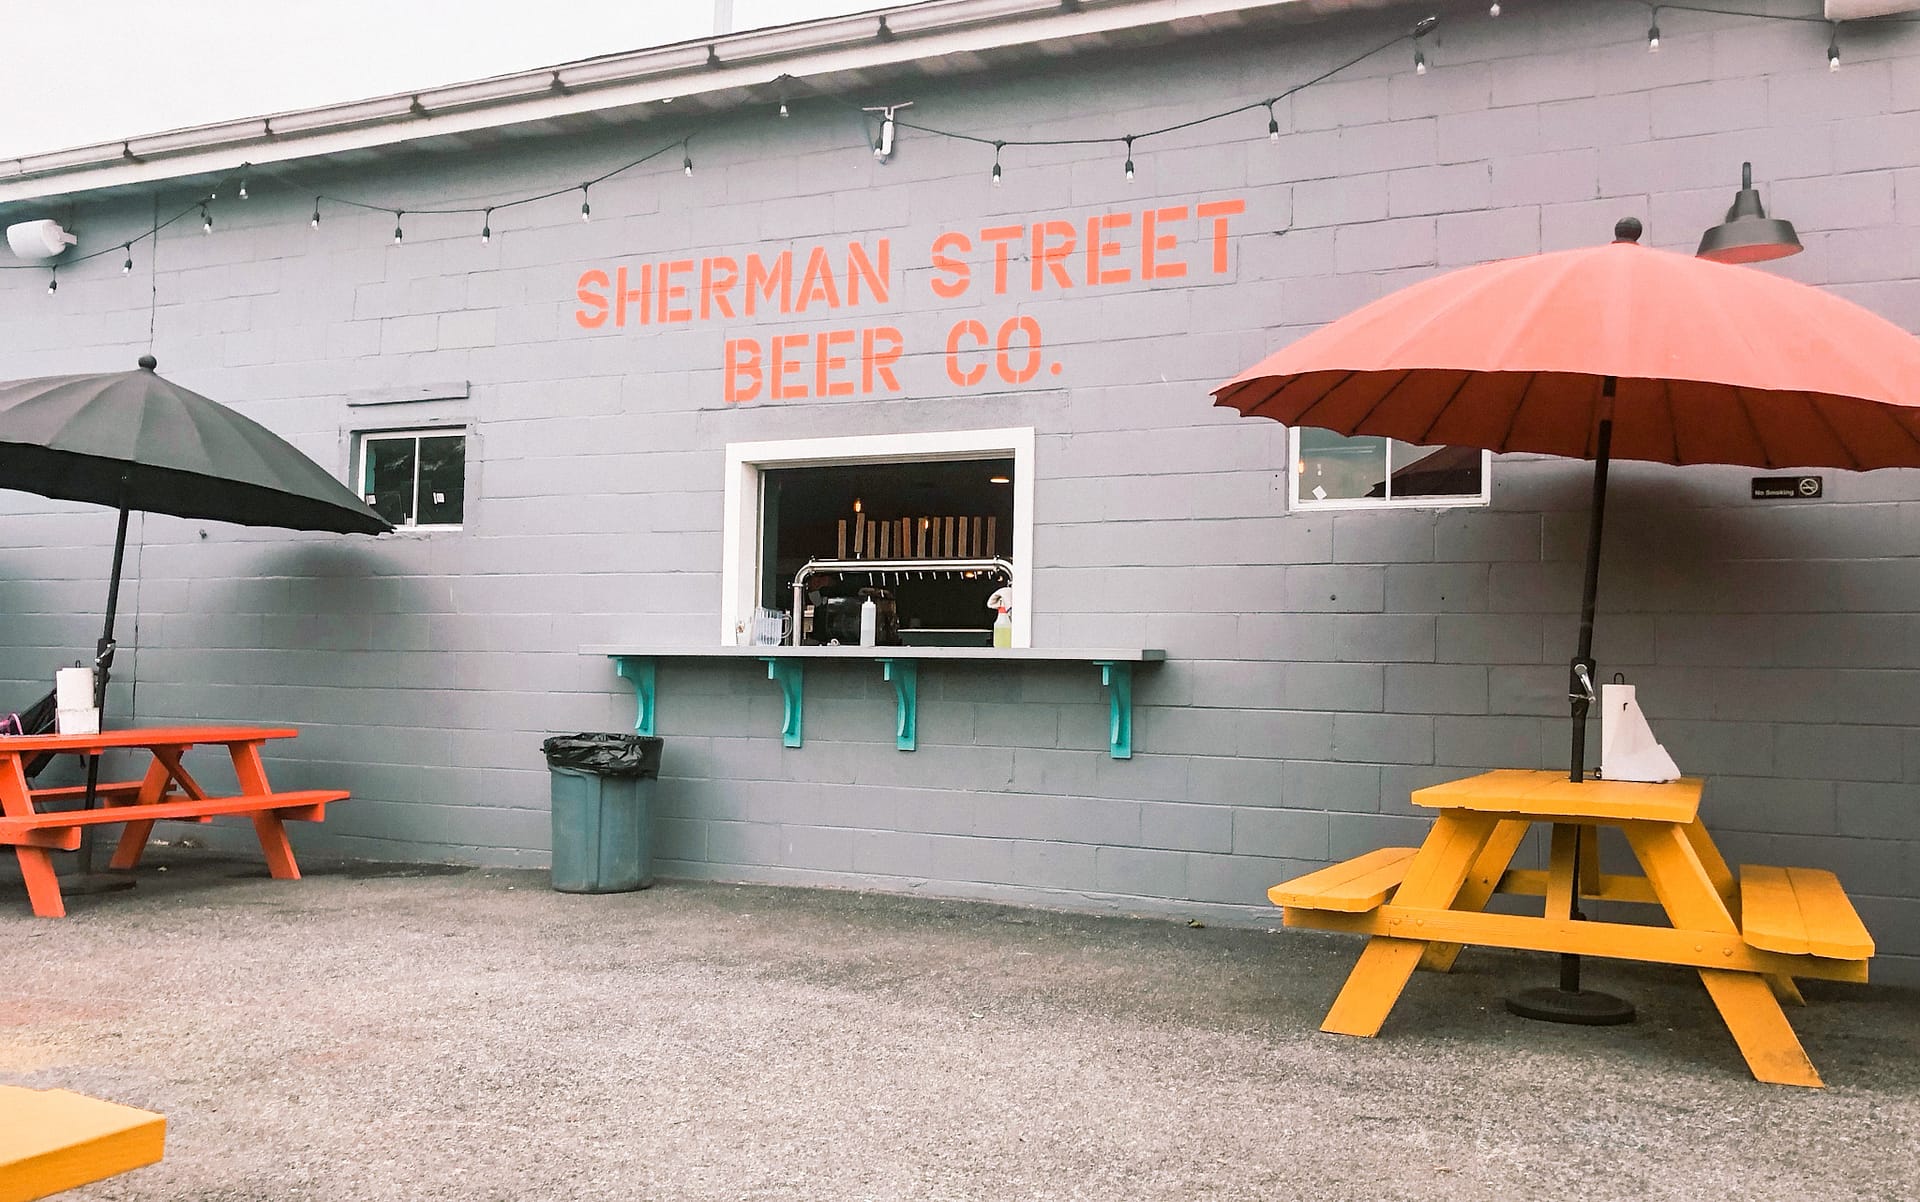 Beer garden take out window paninted sign above window reads Sherman Street Beer Co.